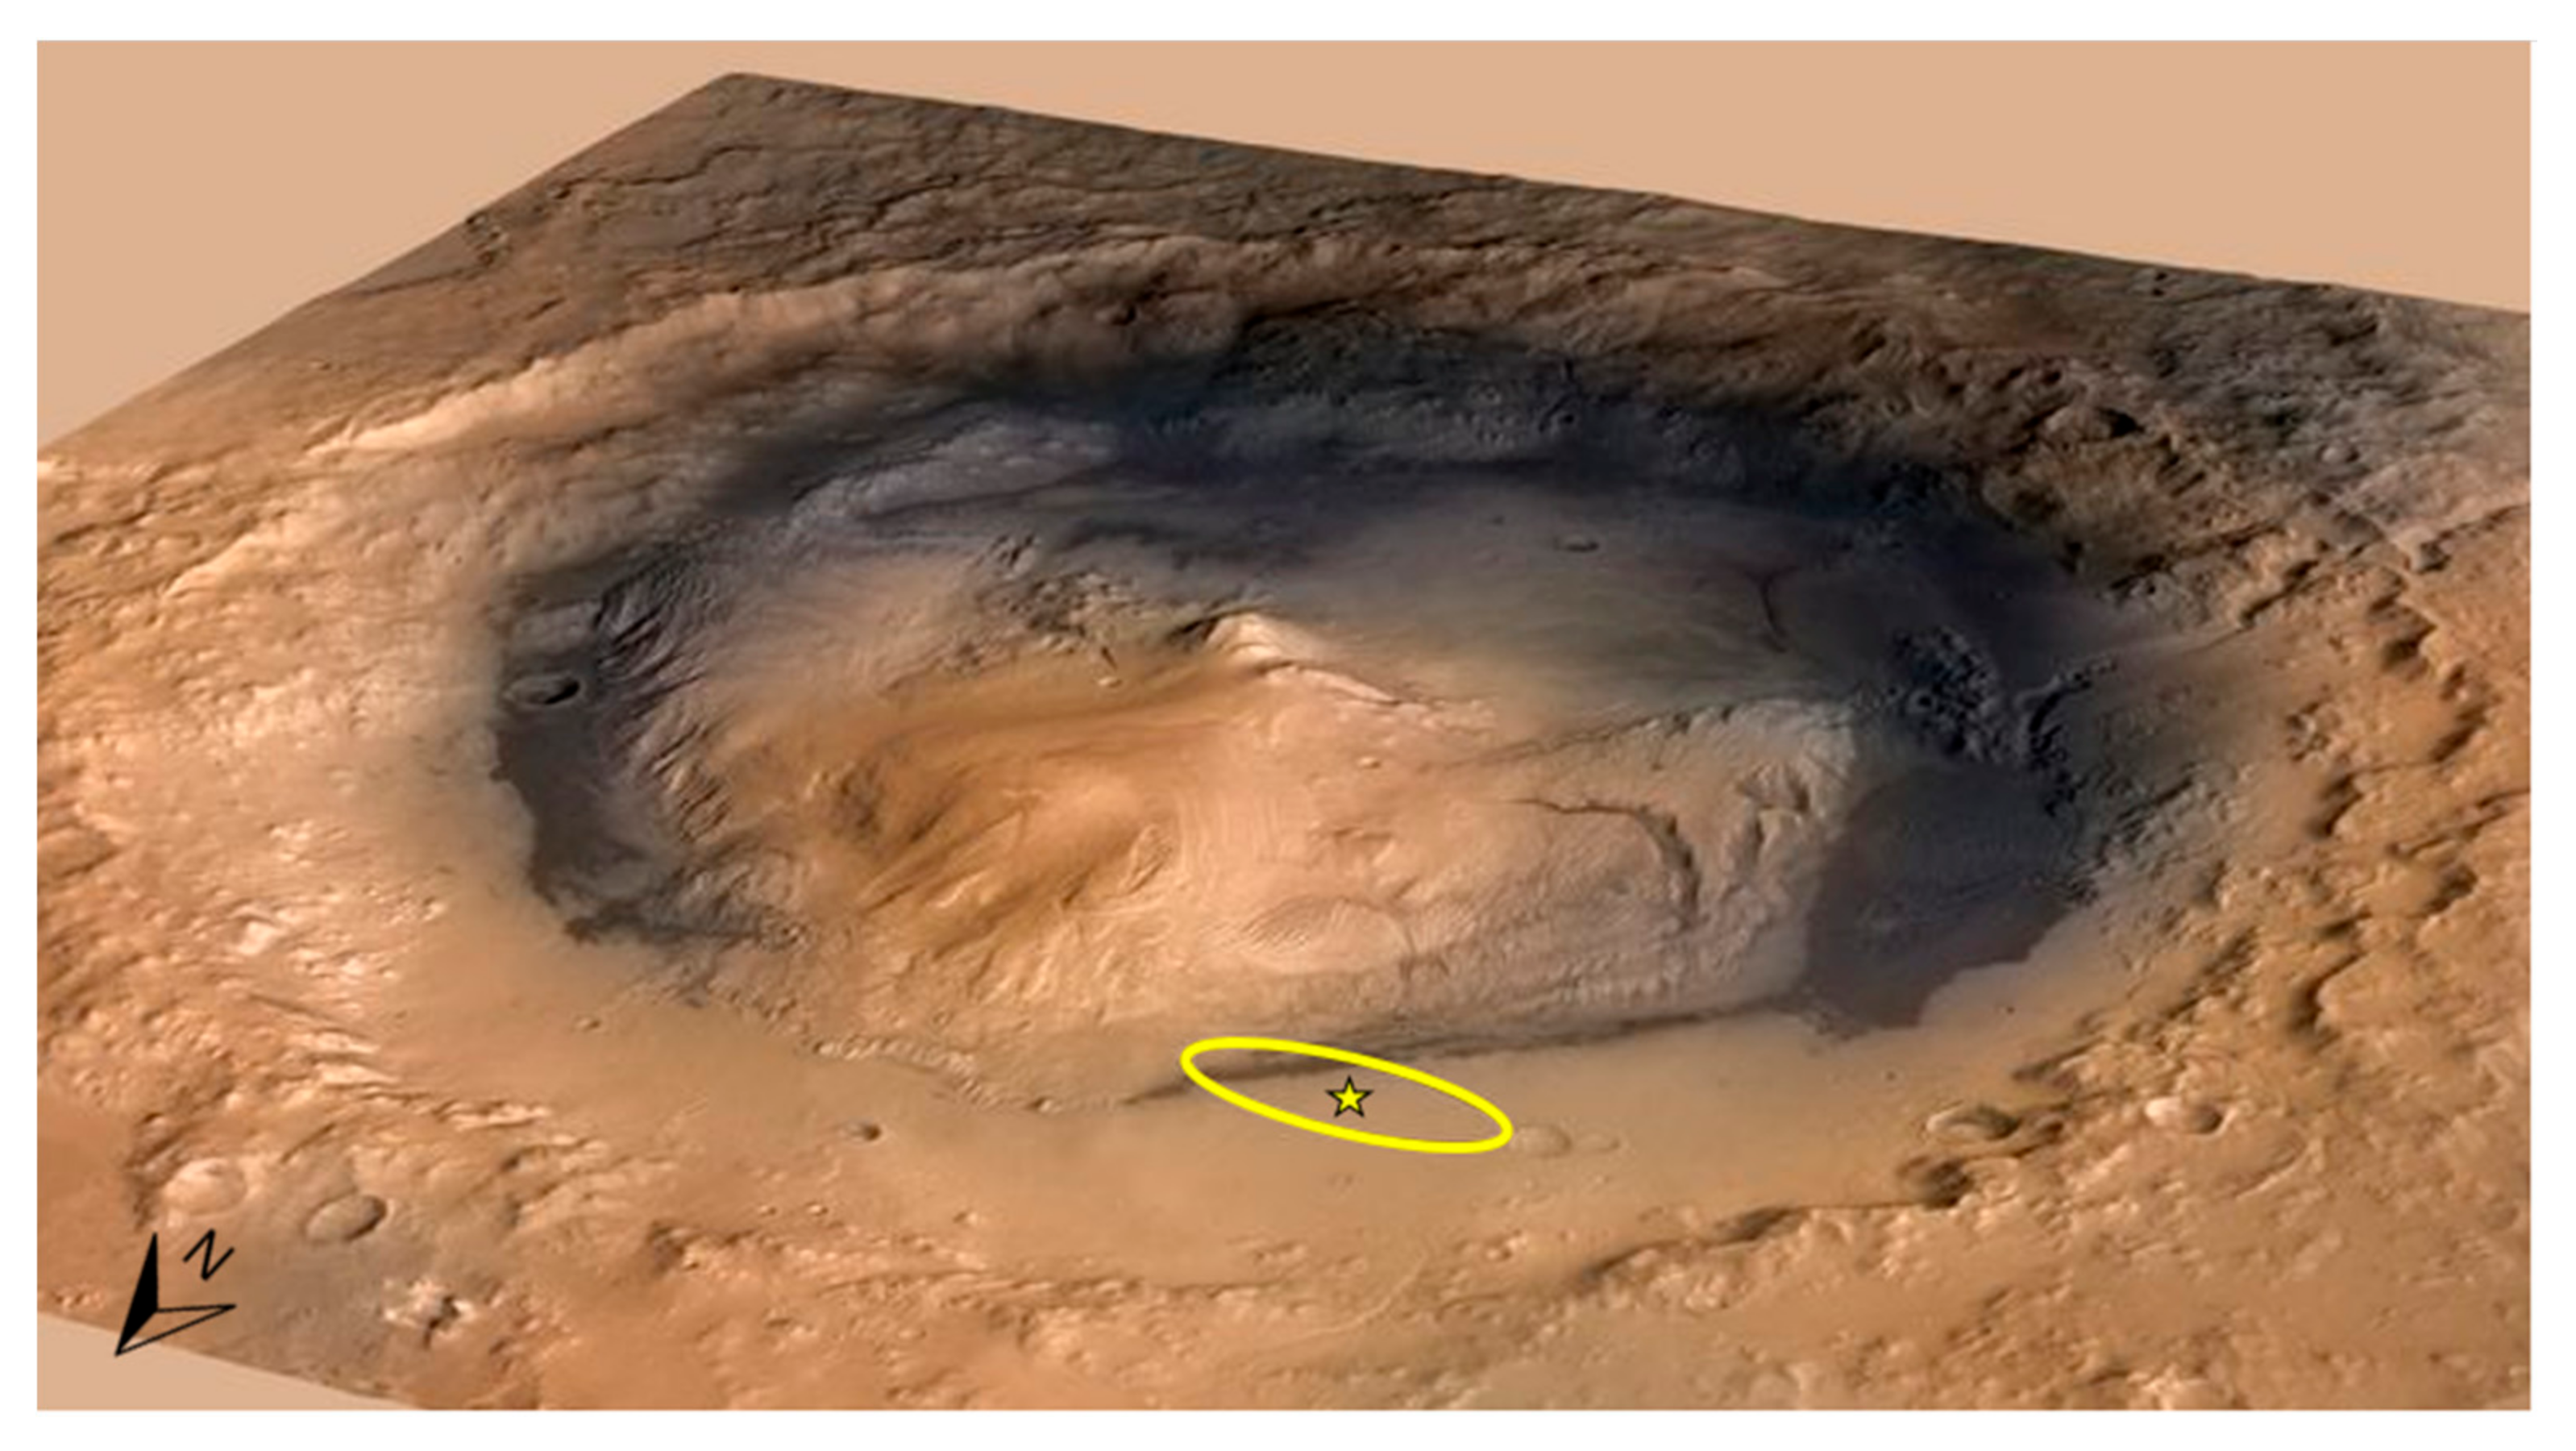 Minerals | Free Full-Text | A Review of the Phyllosilicates in Gale Crater  as Detected by the CheMin Instrument on the Mars Science Laboratory,  Curiosity Rover | HTML